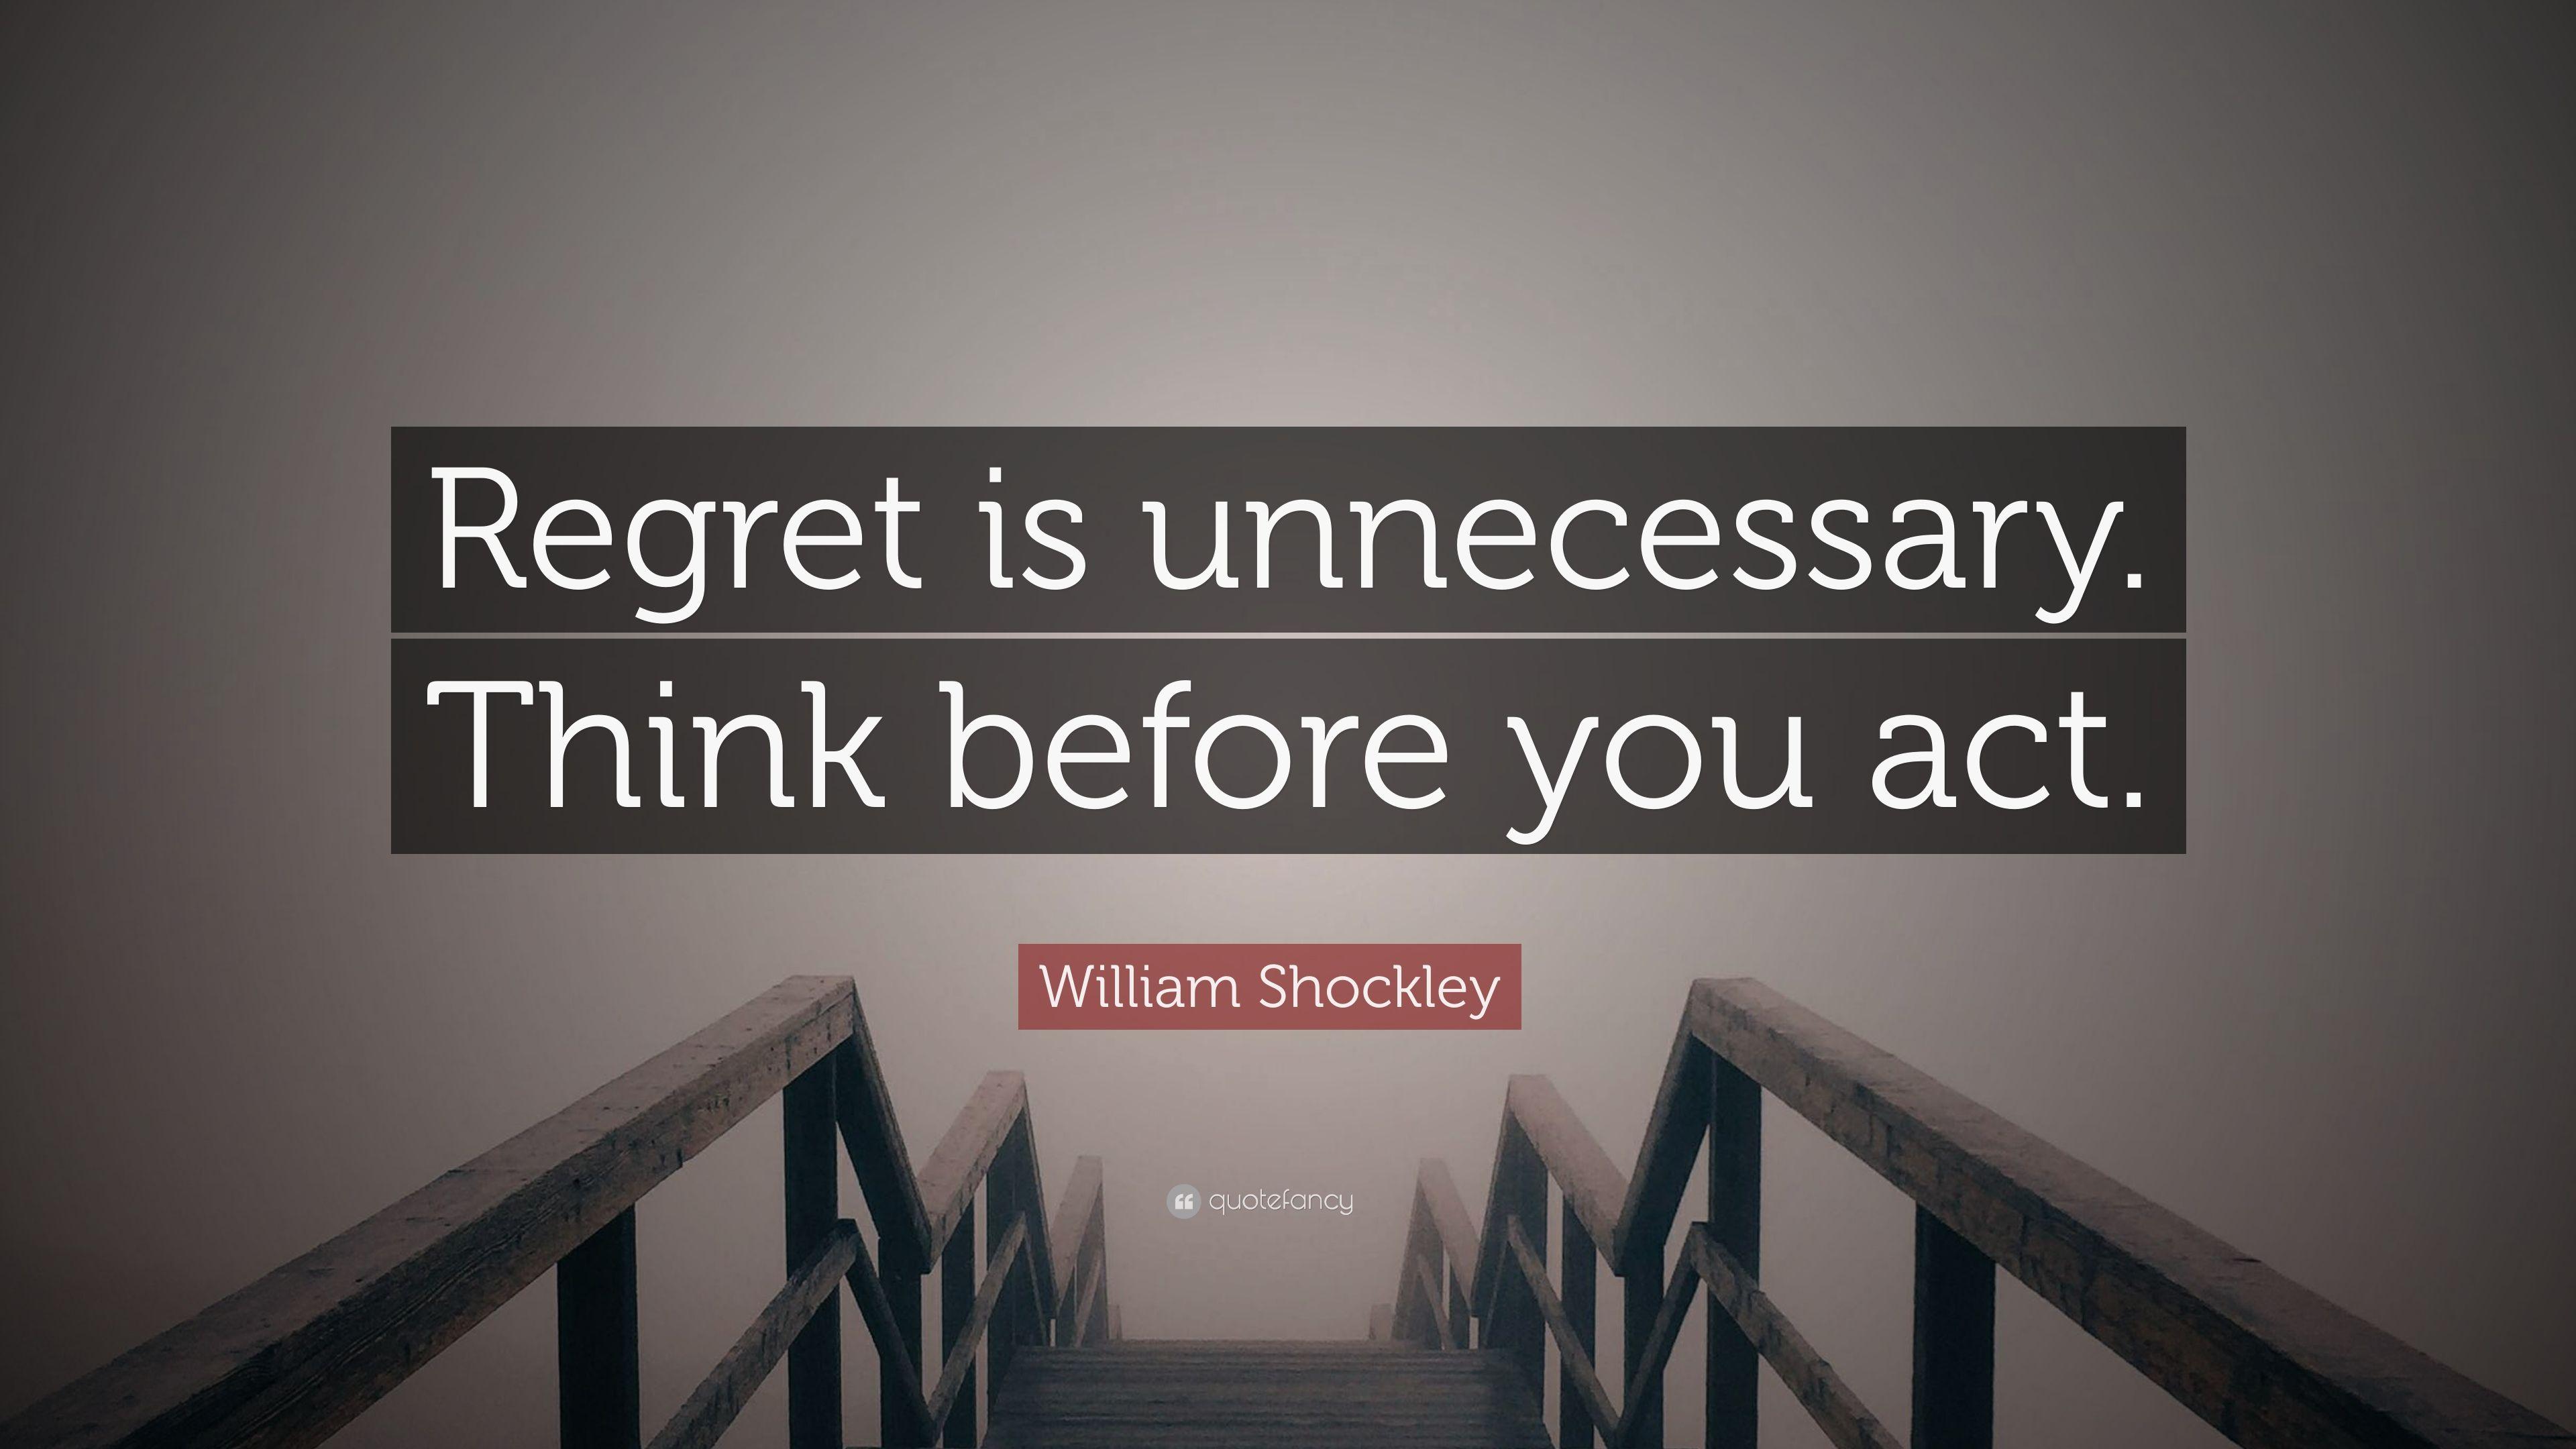 William Shockley Quote: “Regret is unnecessary. Think before you act